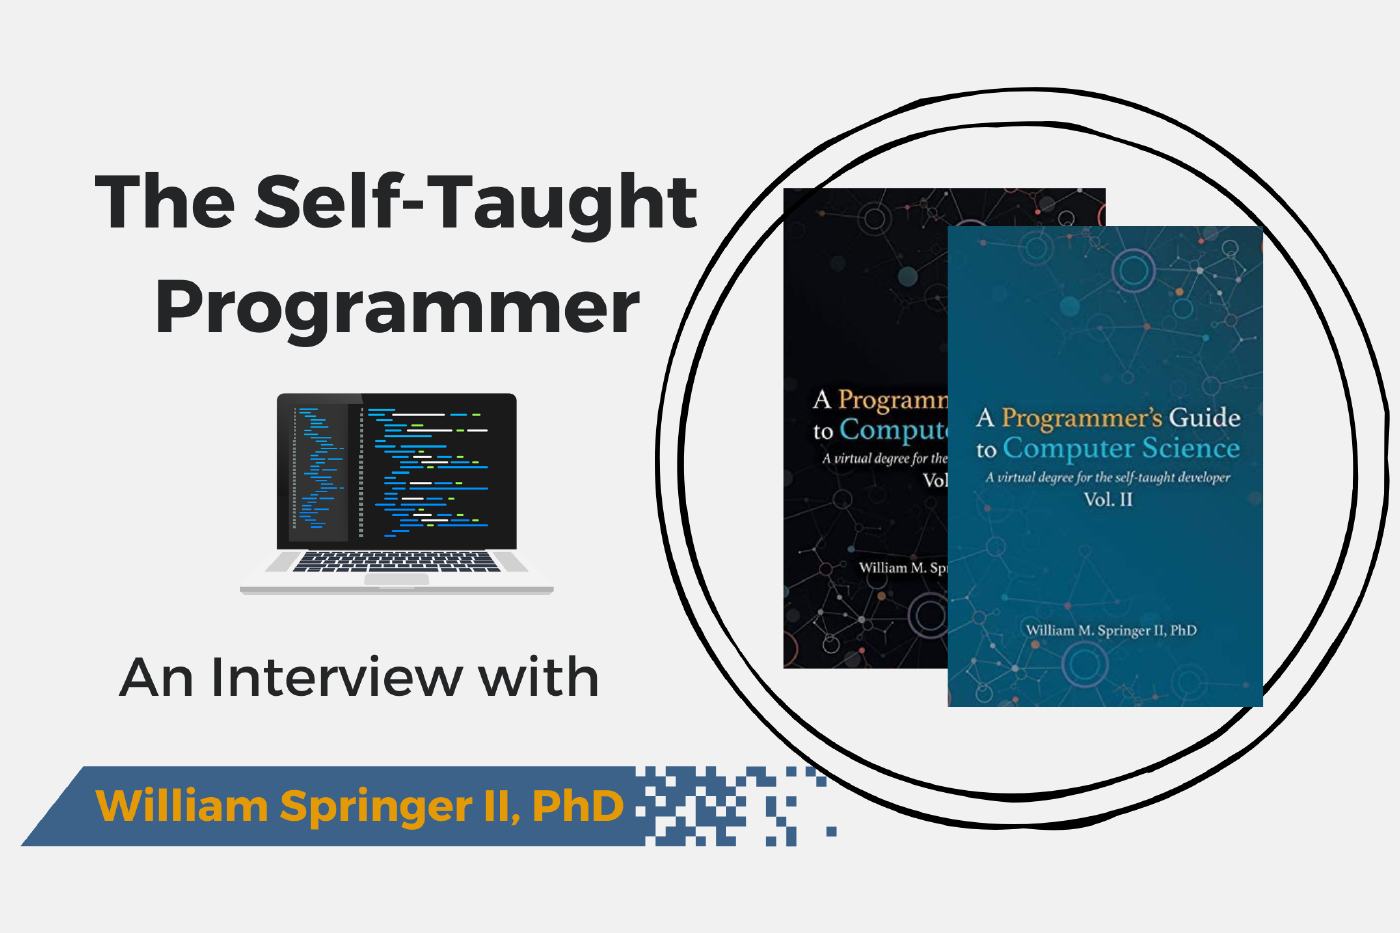 The Self-Taught Programmer: An Interview with William Springer II, PhD